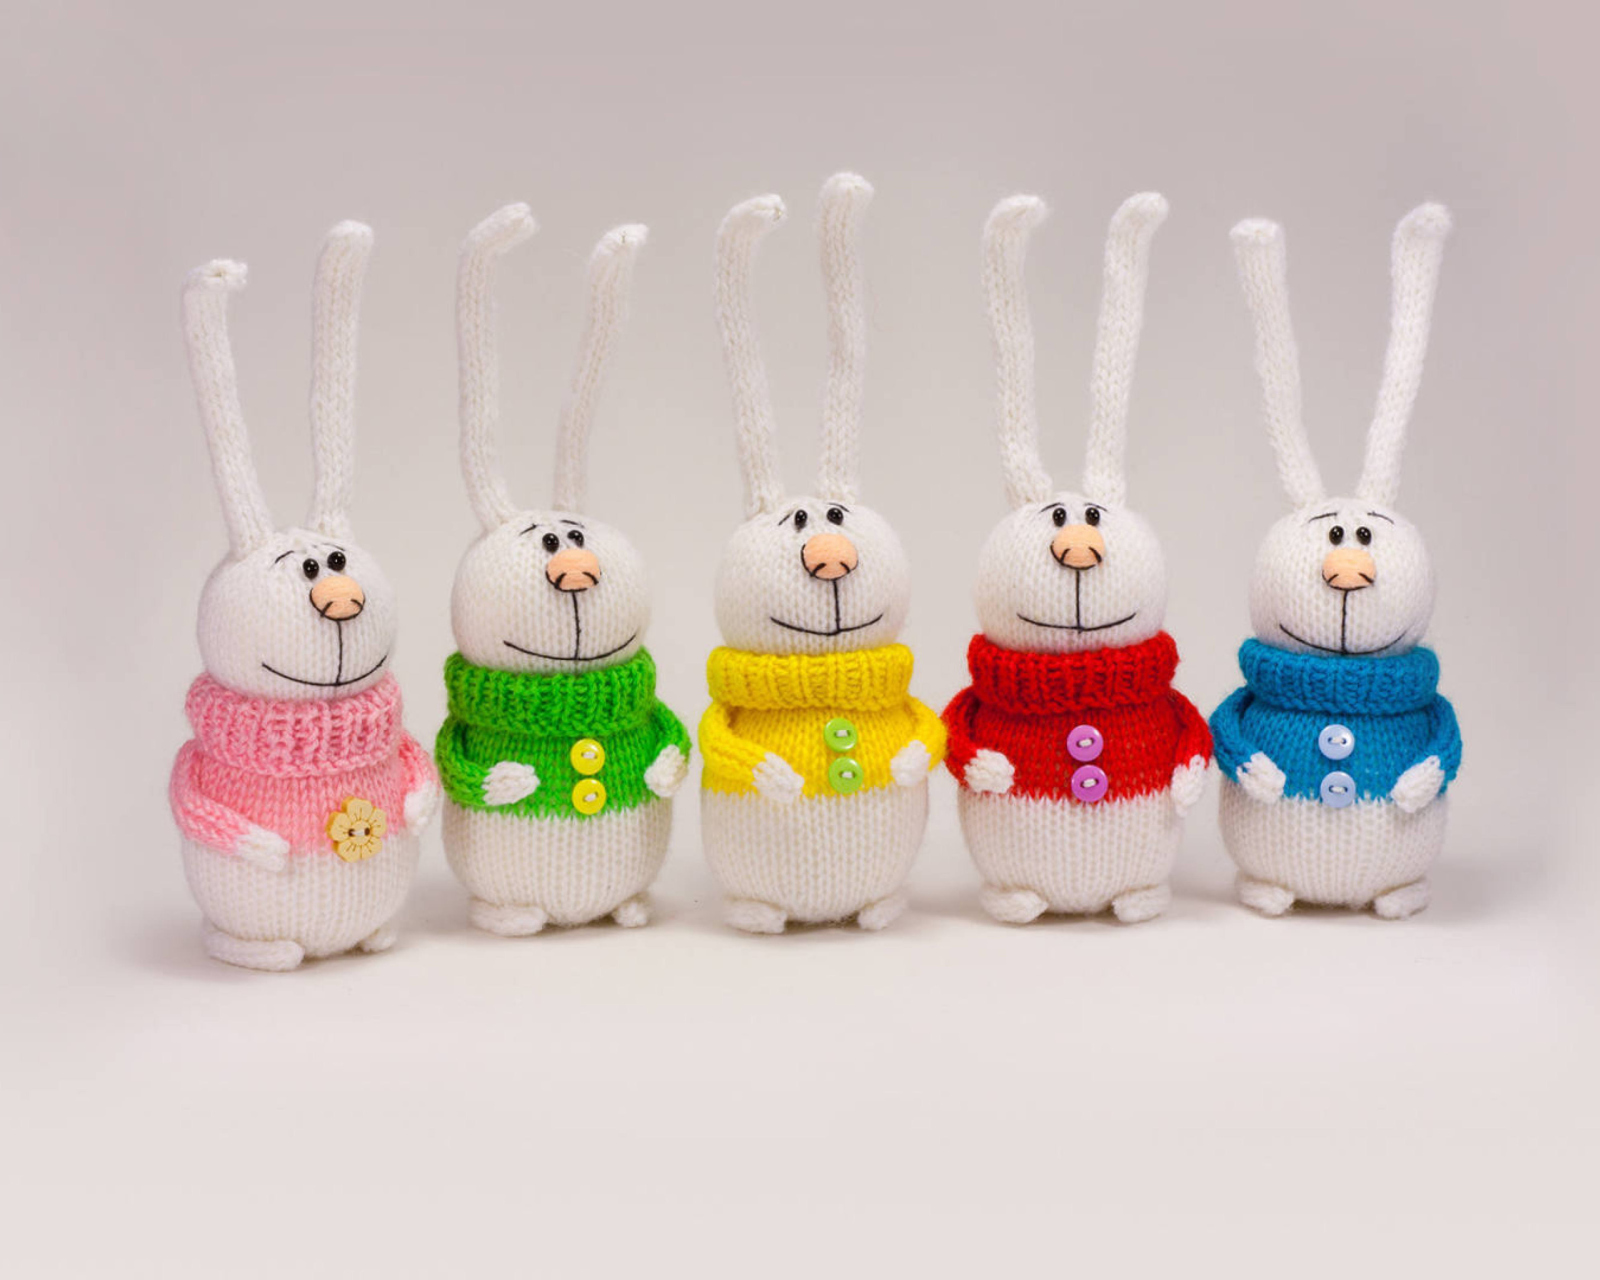 Funny Knitted Bunnies wallpaper 1600x1280